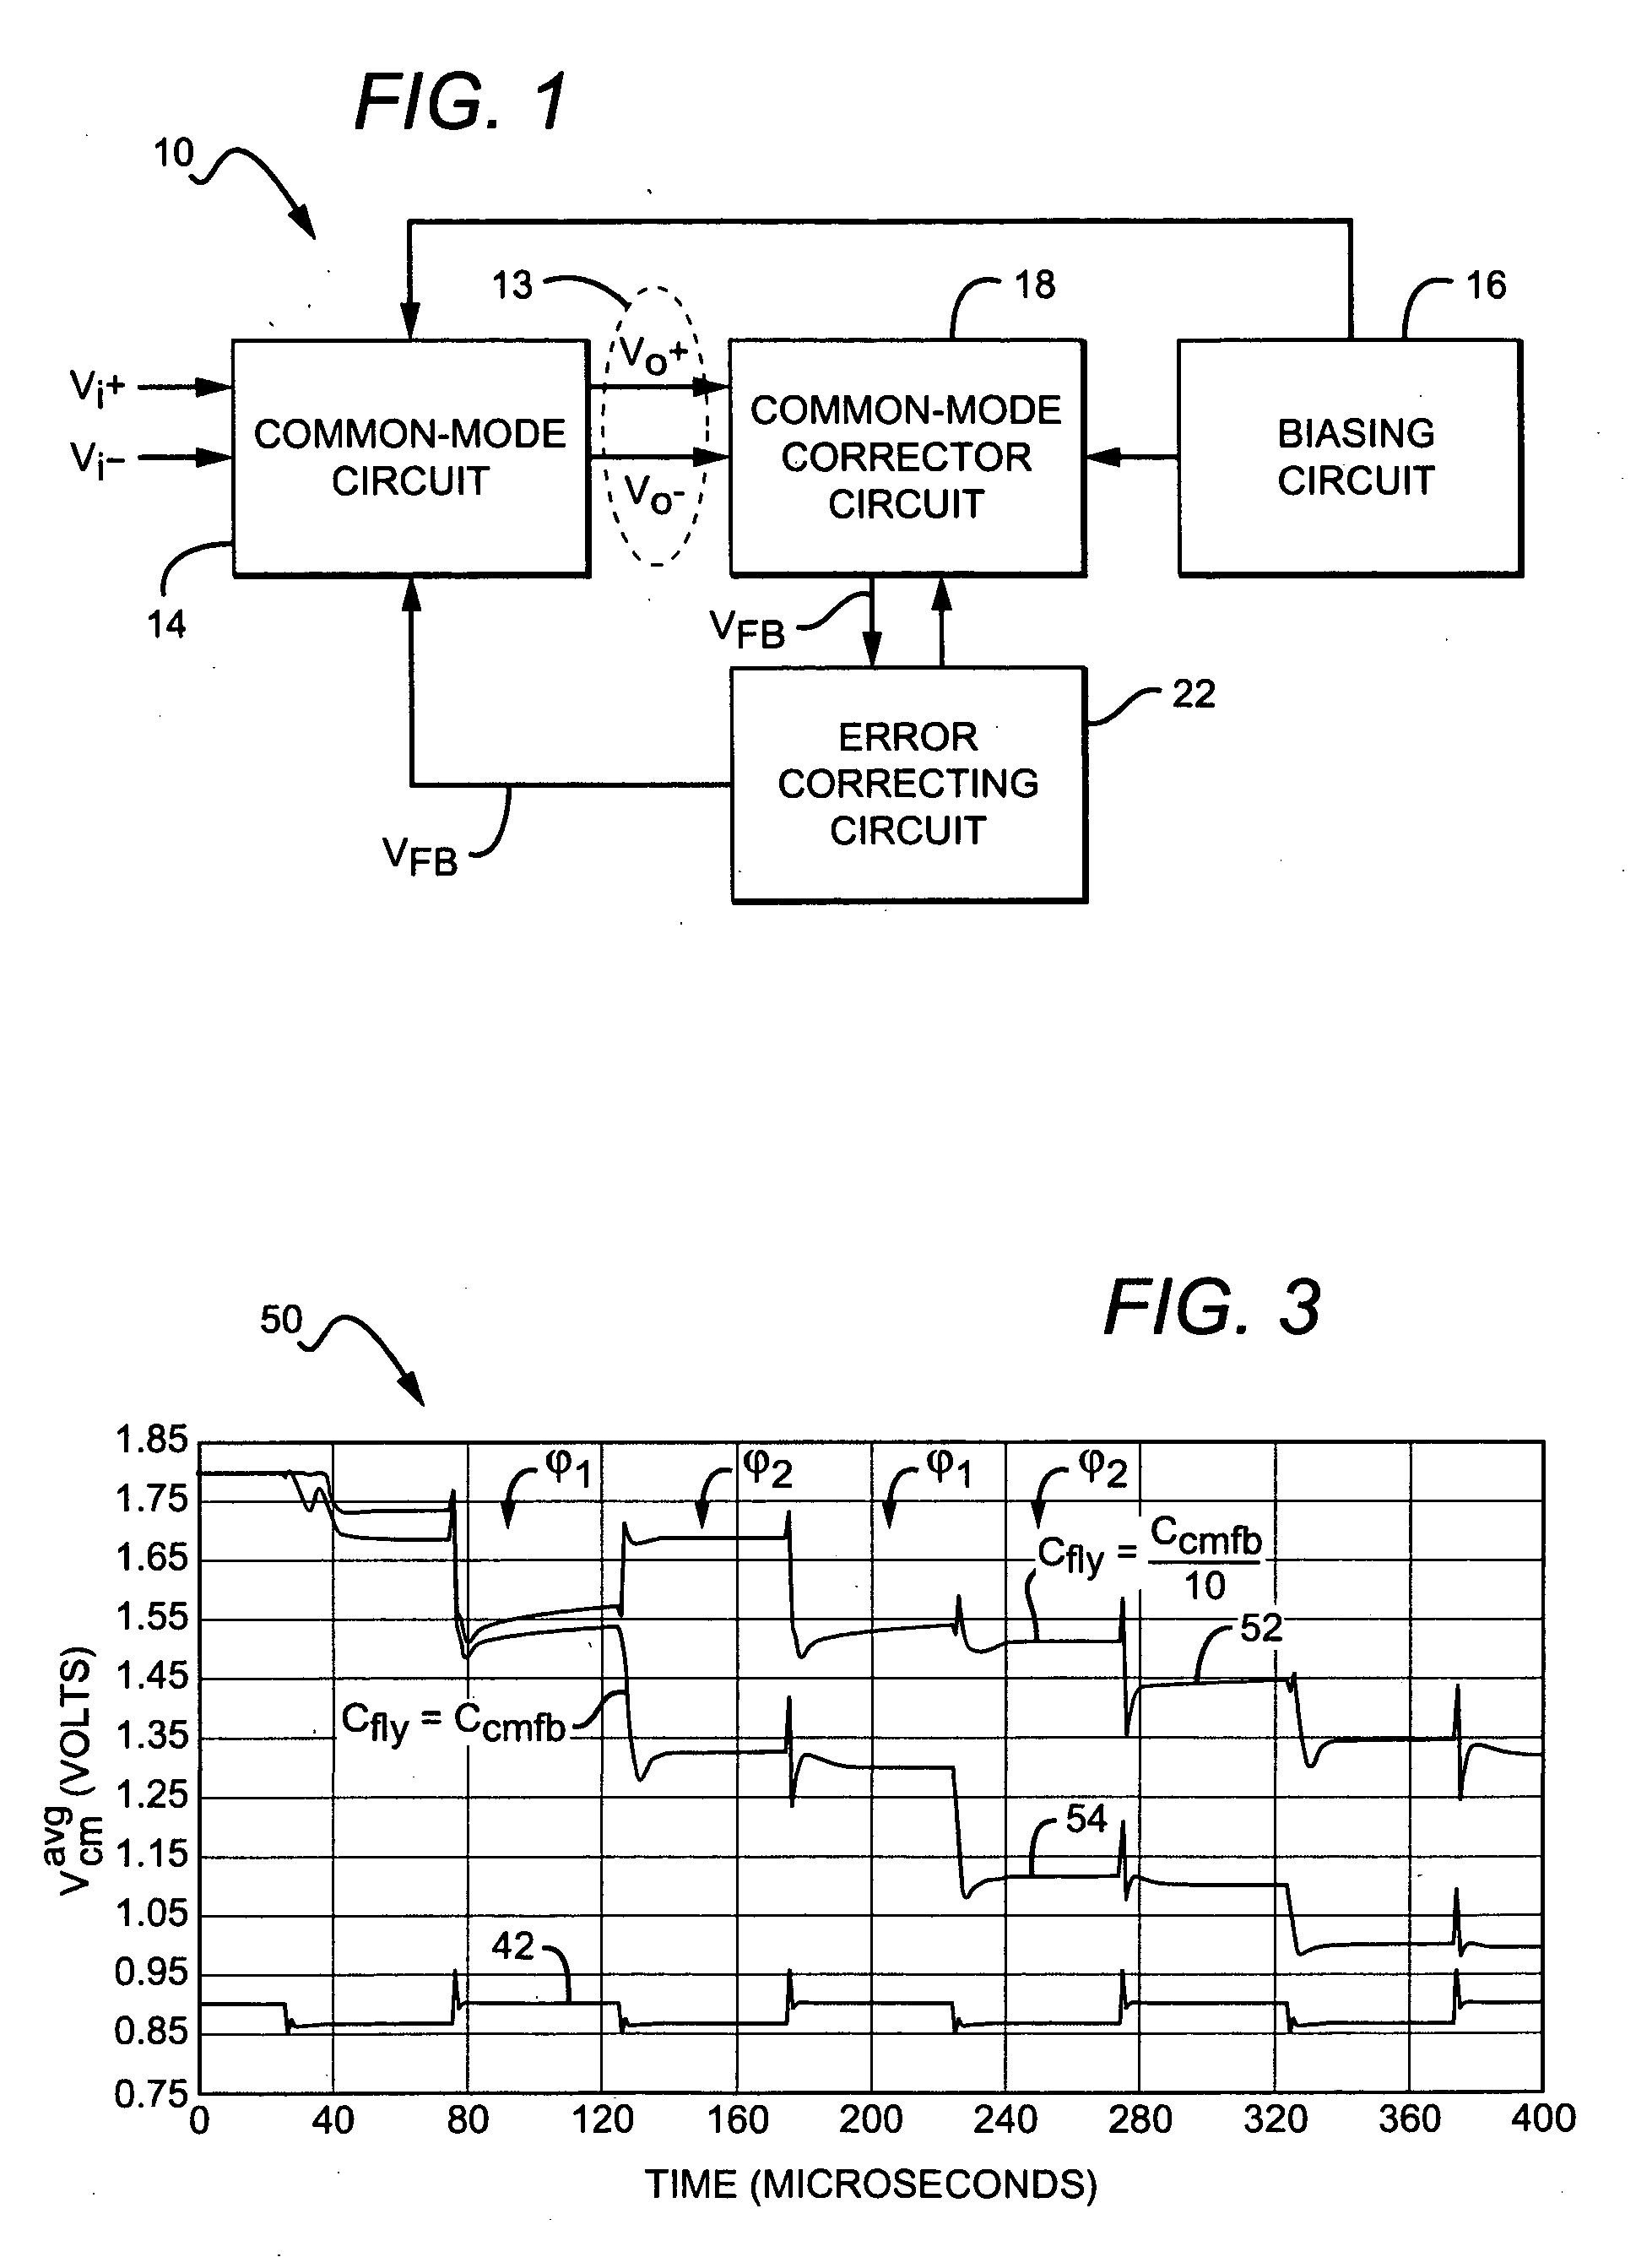 Switched capacitor circuit with reduced common-mode variations